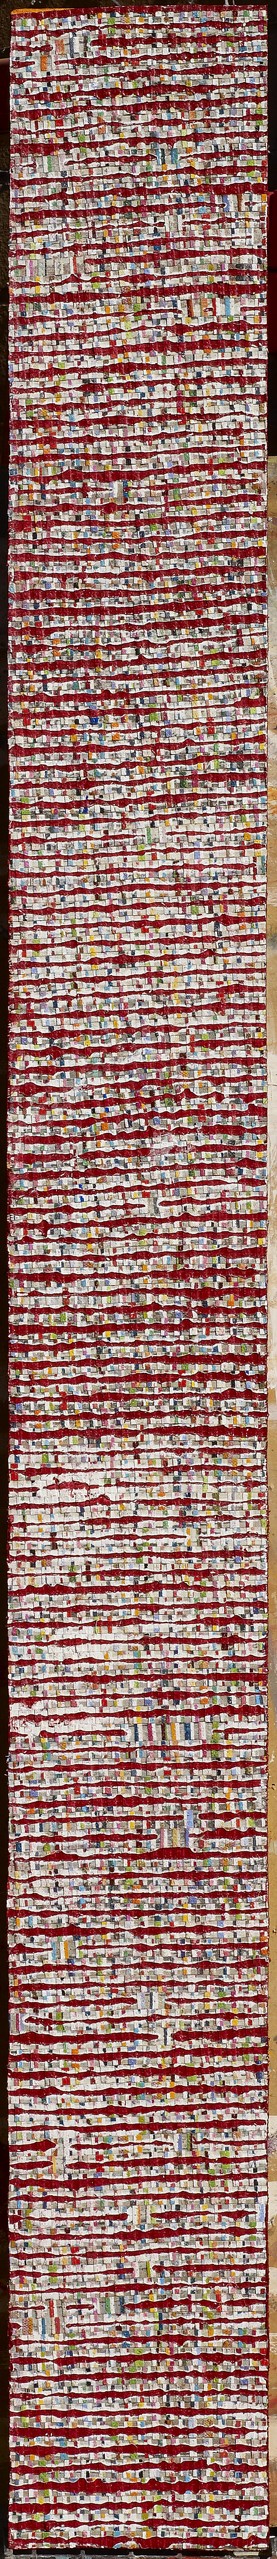 Eveline Kotai - Totem/Red, 2012, mixed media stitched collage, 140x12cm (private collection)